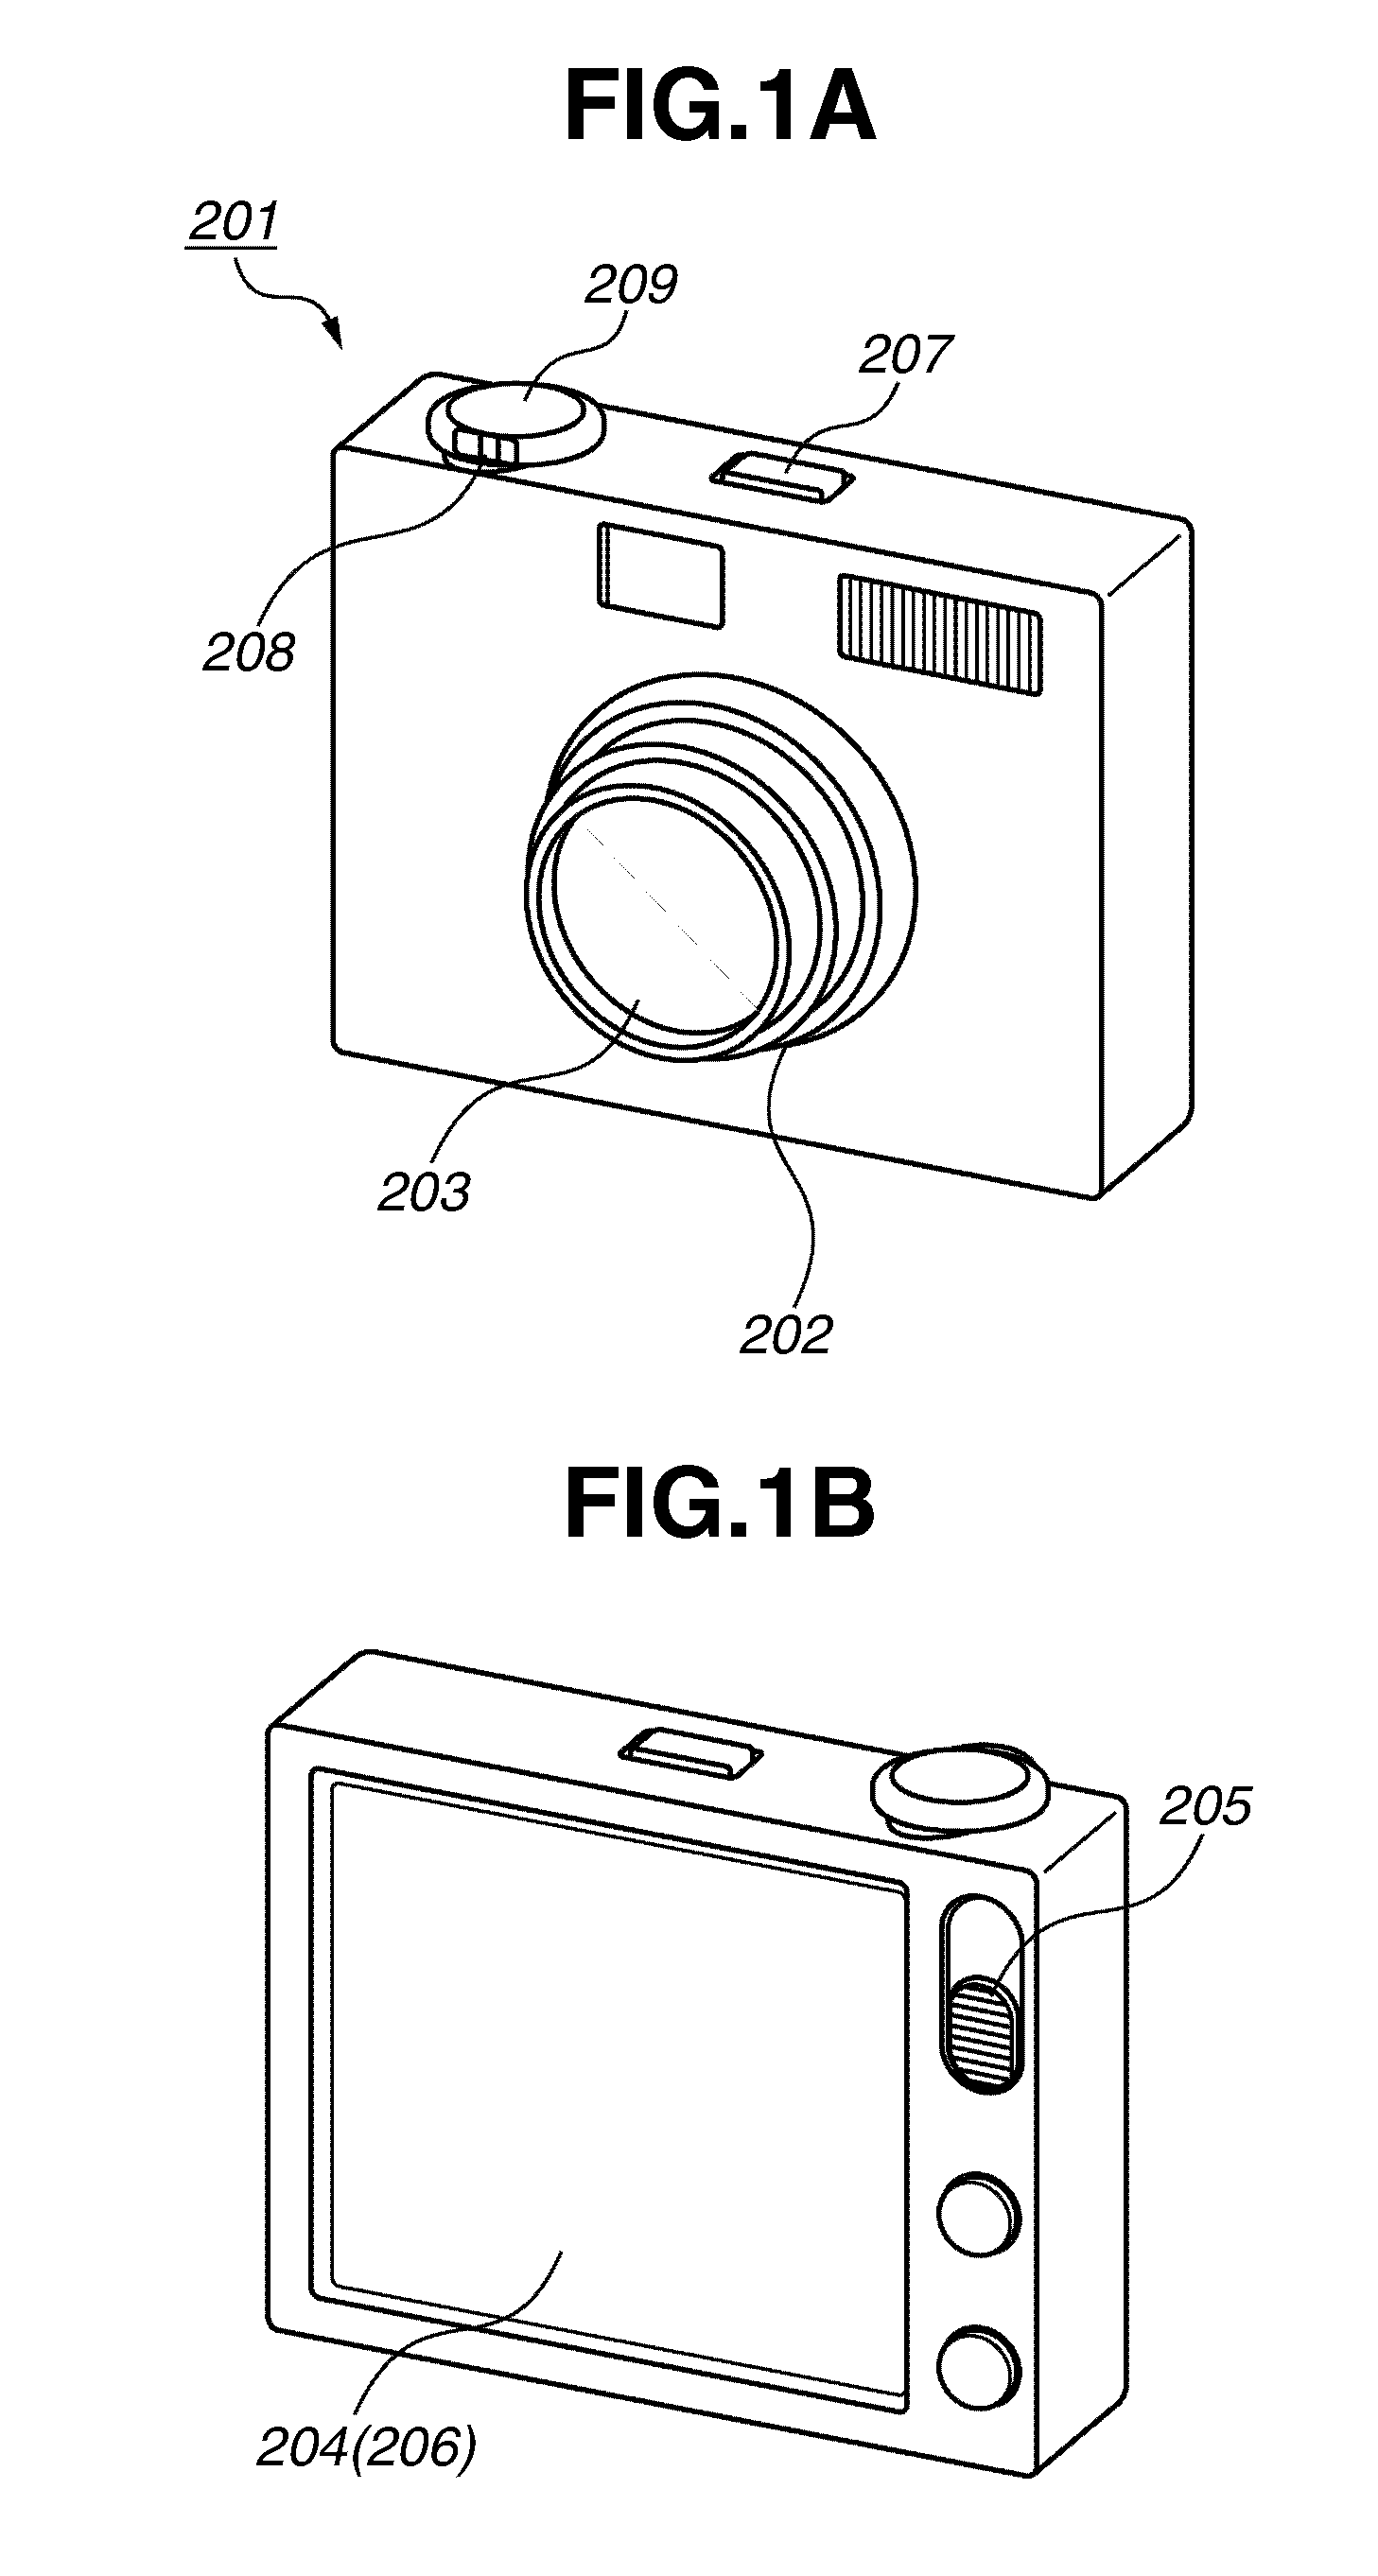 Imaging apparatus for performing automatic zoom control in consideration of face inclination of a subject image